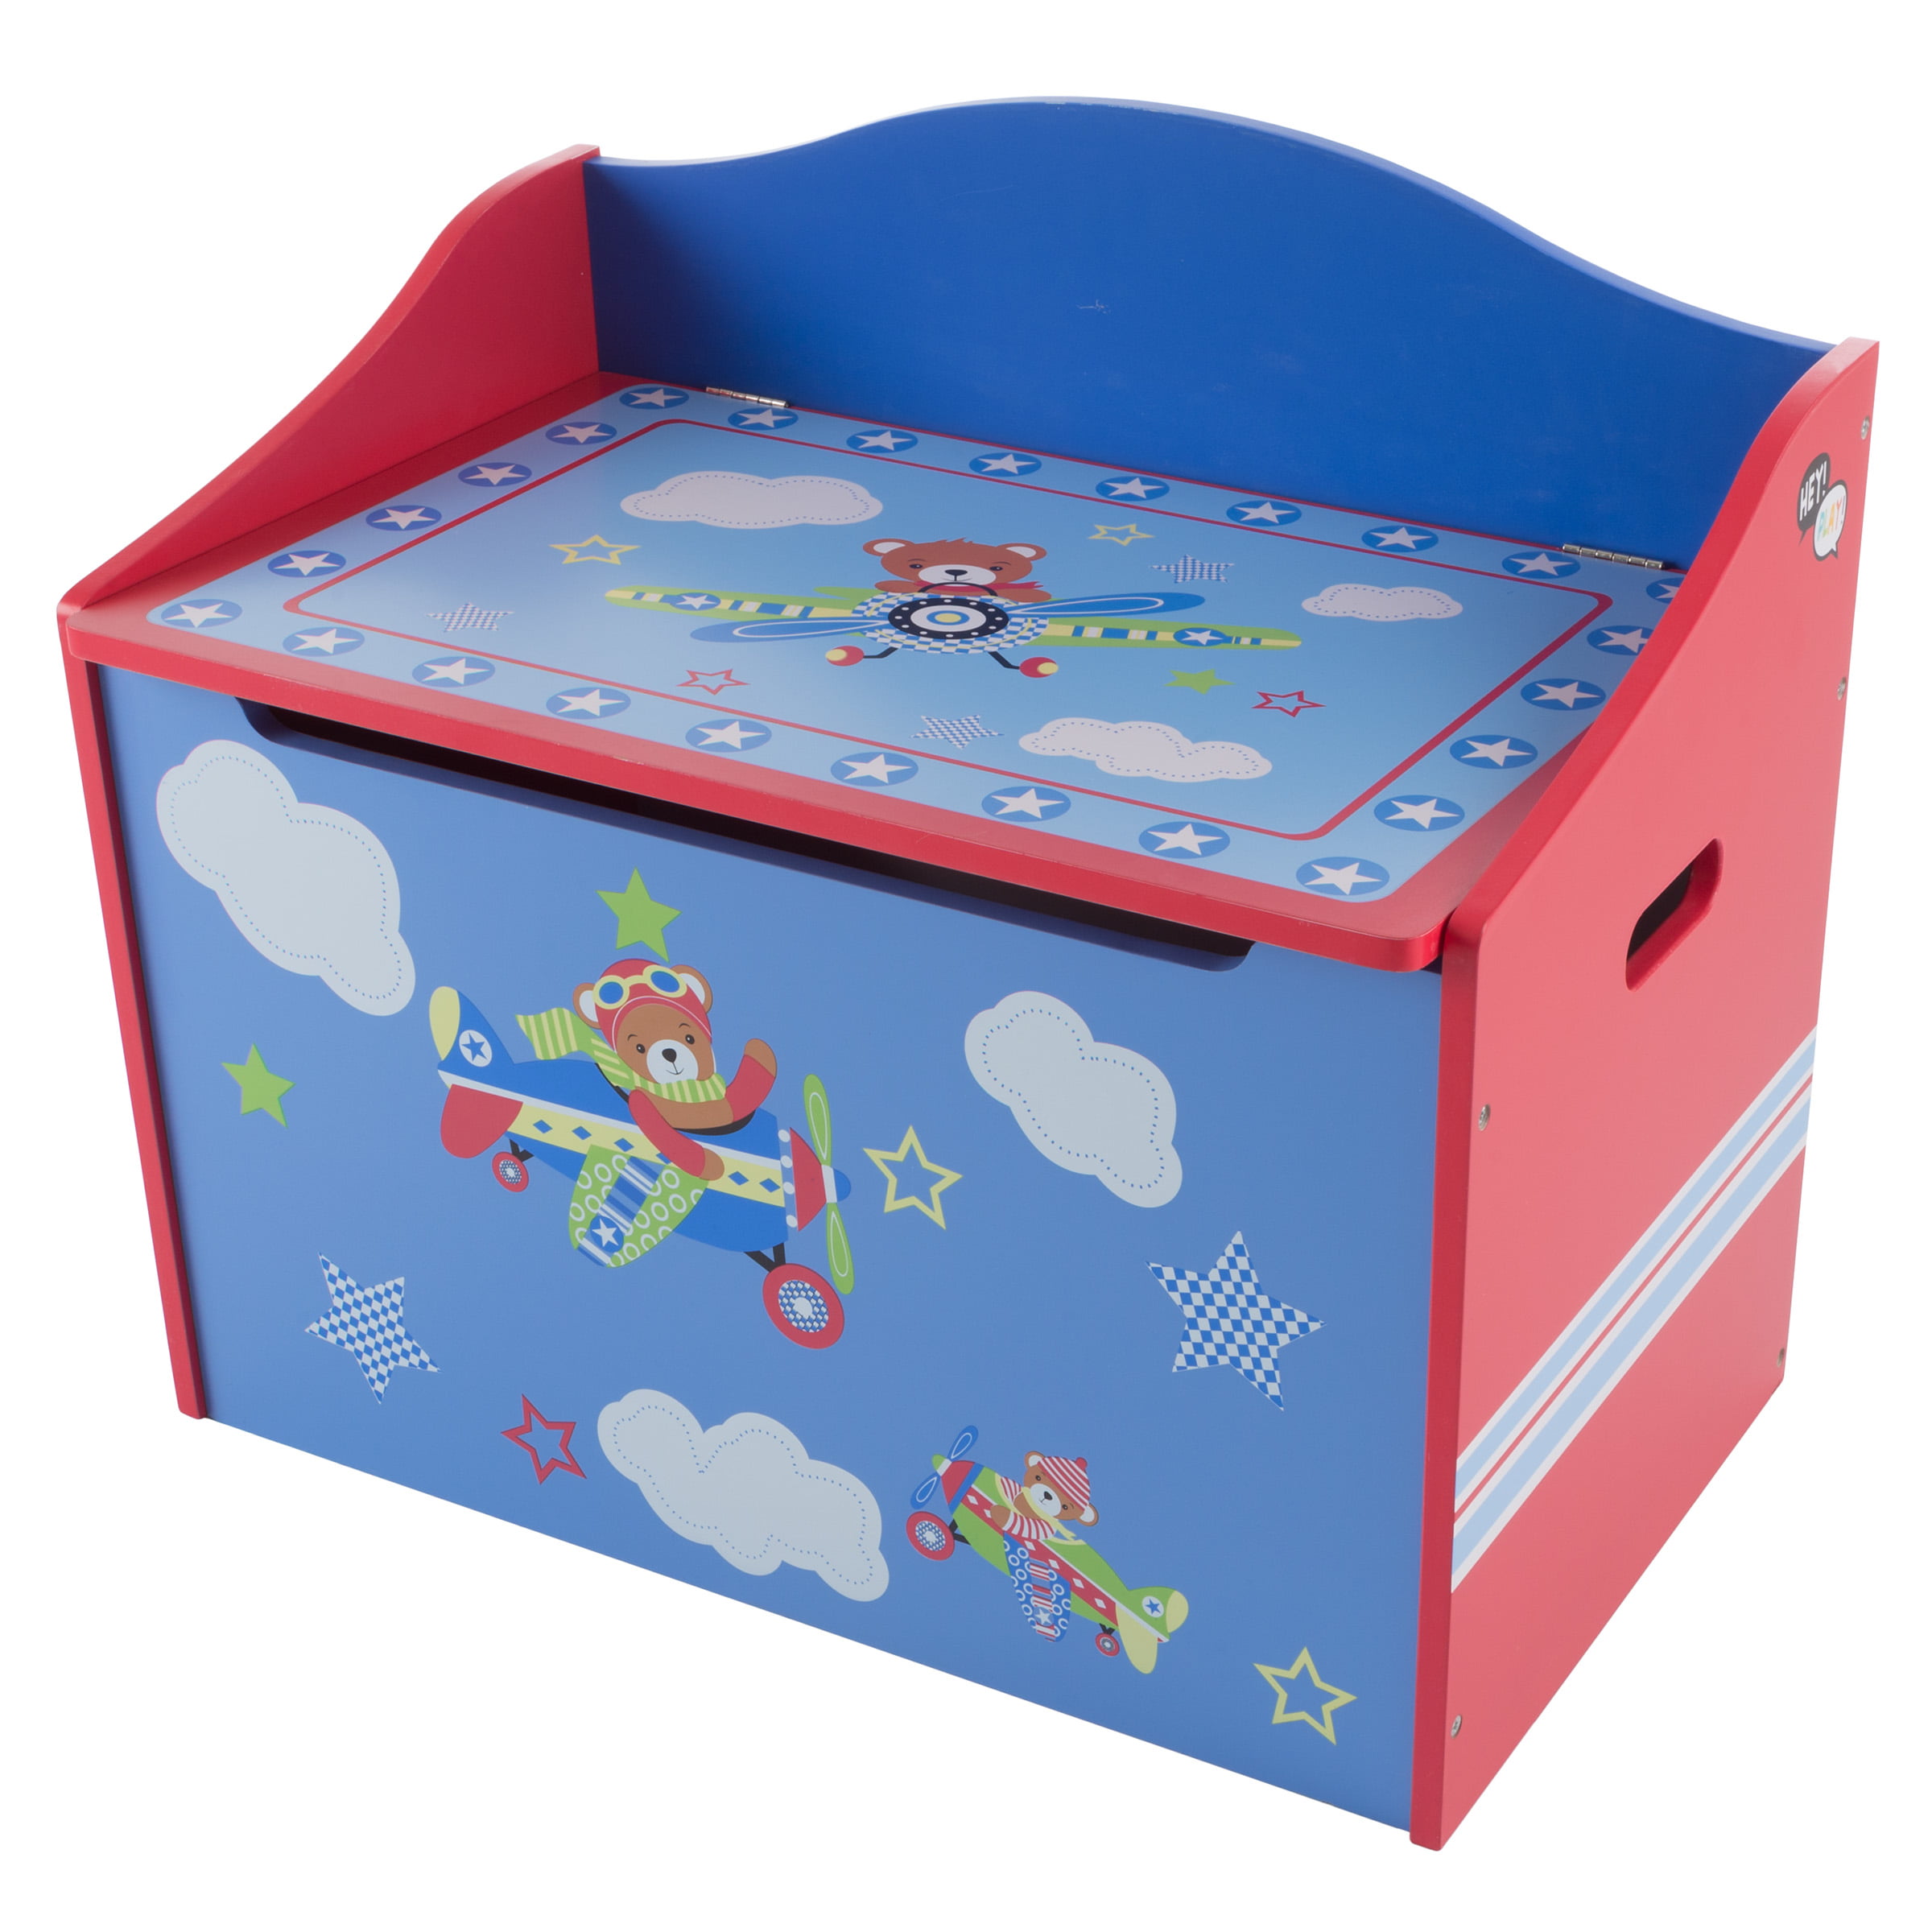 Toy Box-Storage Bench Seat for Kids-Organization Chest for Toys ...